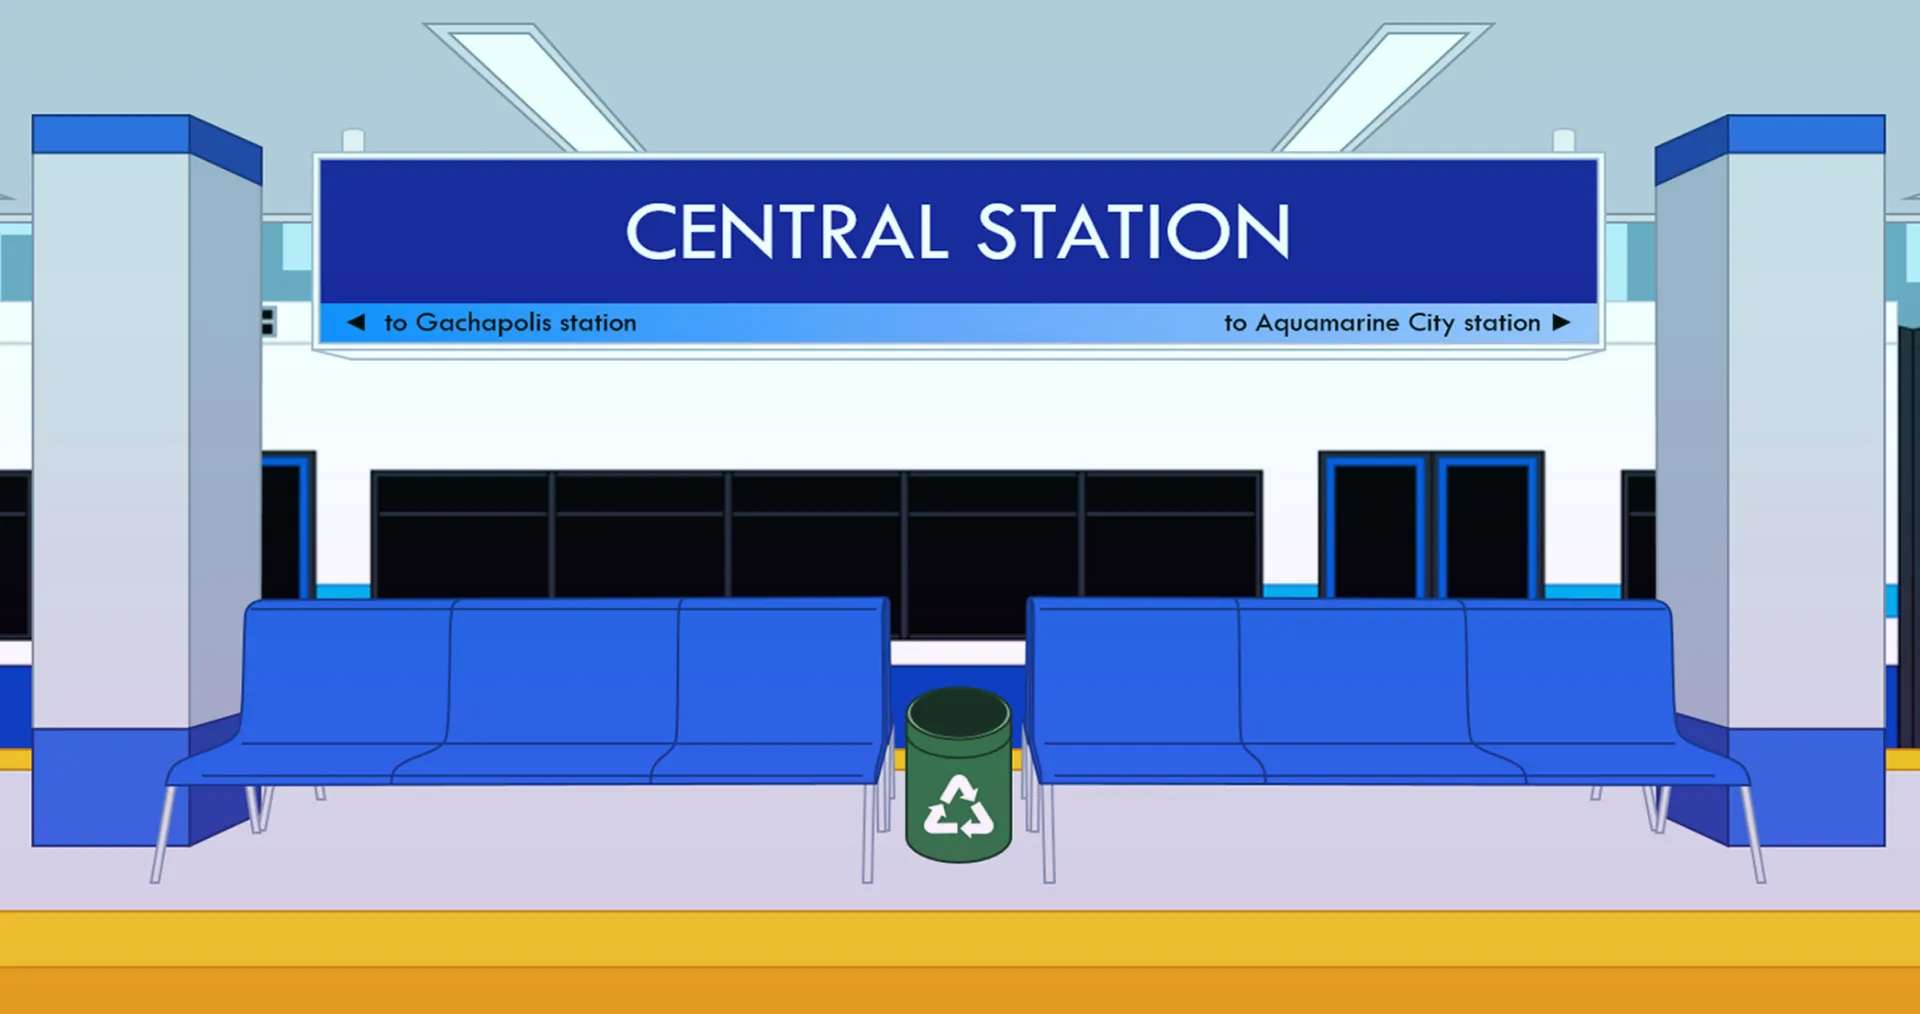 Gacha central station backgrounds